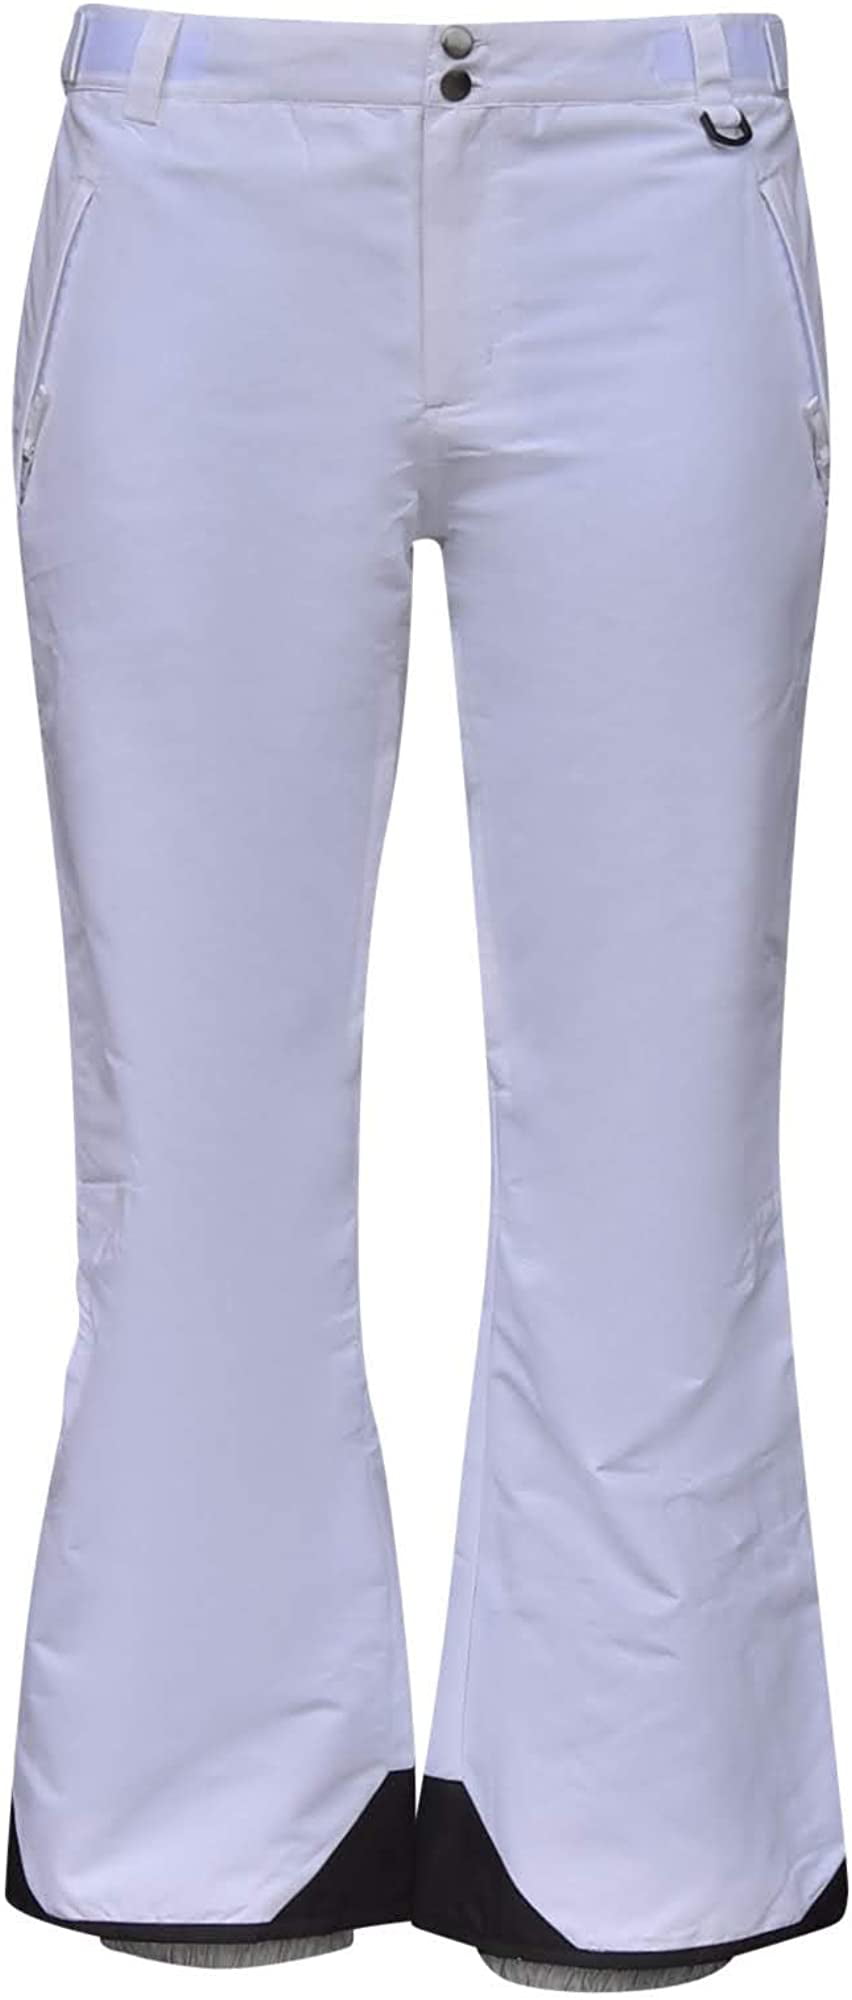 Snow Country Outerwear Womens Ski Pants Insulated Short and Reg